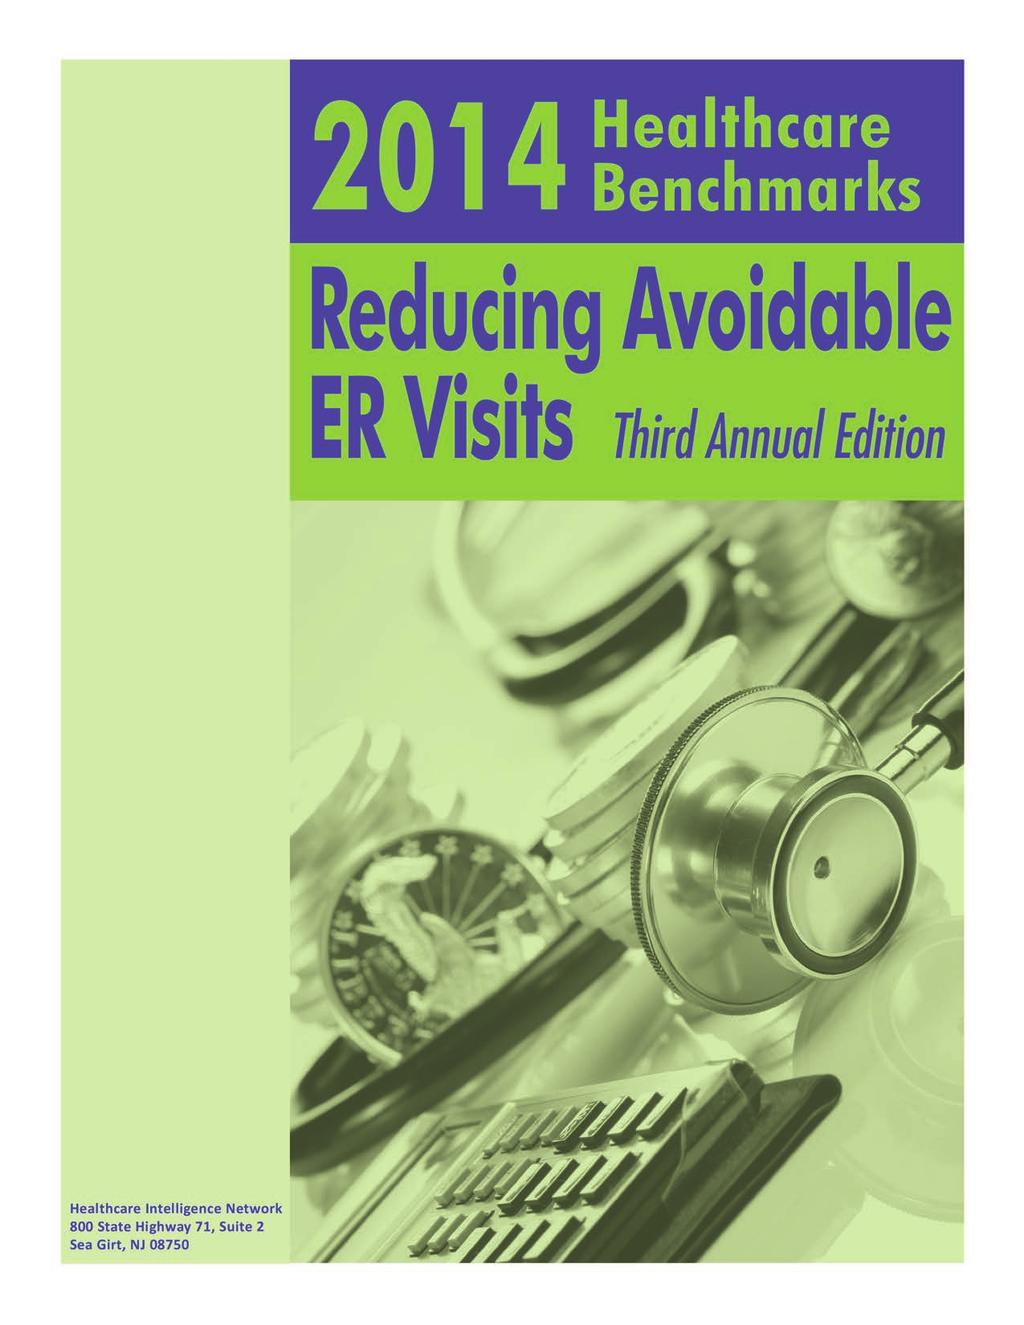 Note: This is an authorized excerpt from 2014 Healthcare Benchmarks:Reducing Avoidable ER Visits.